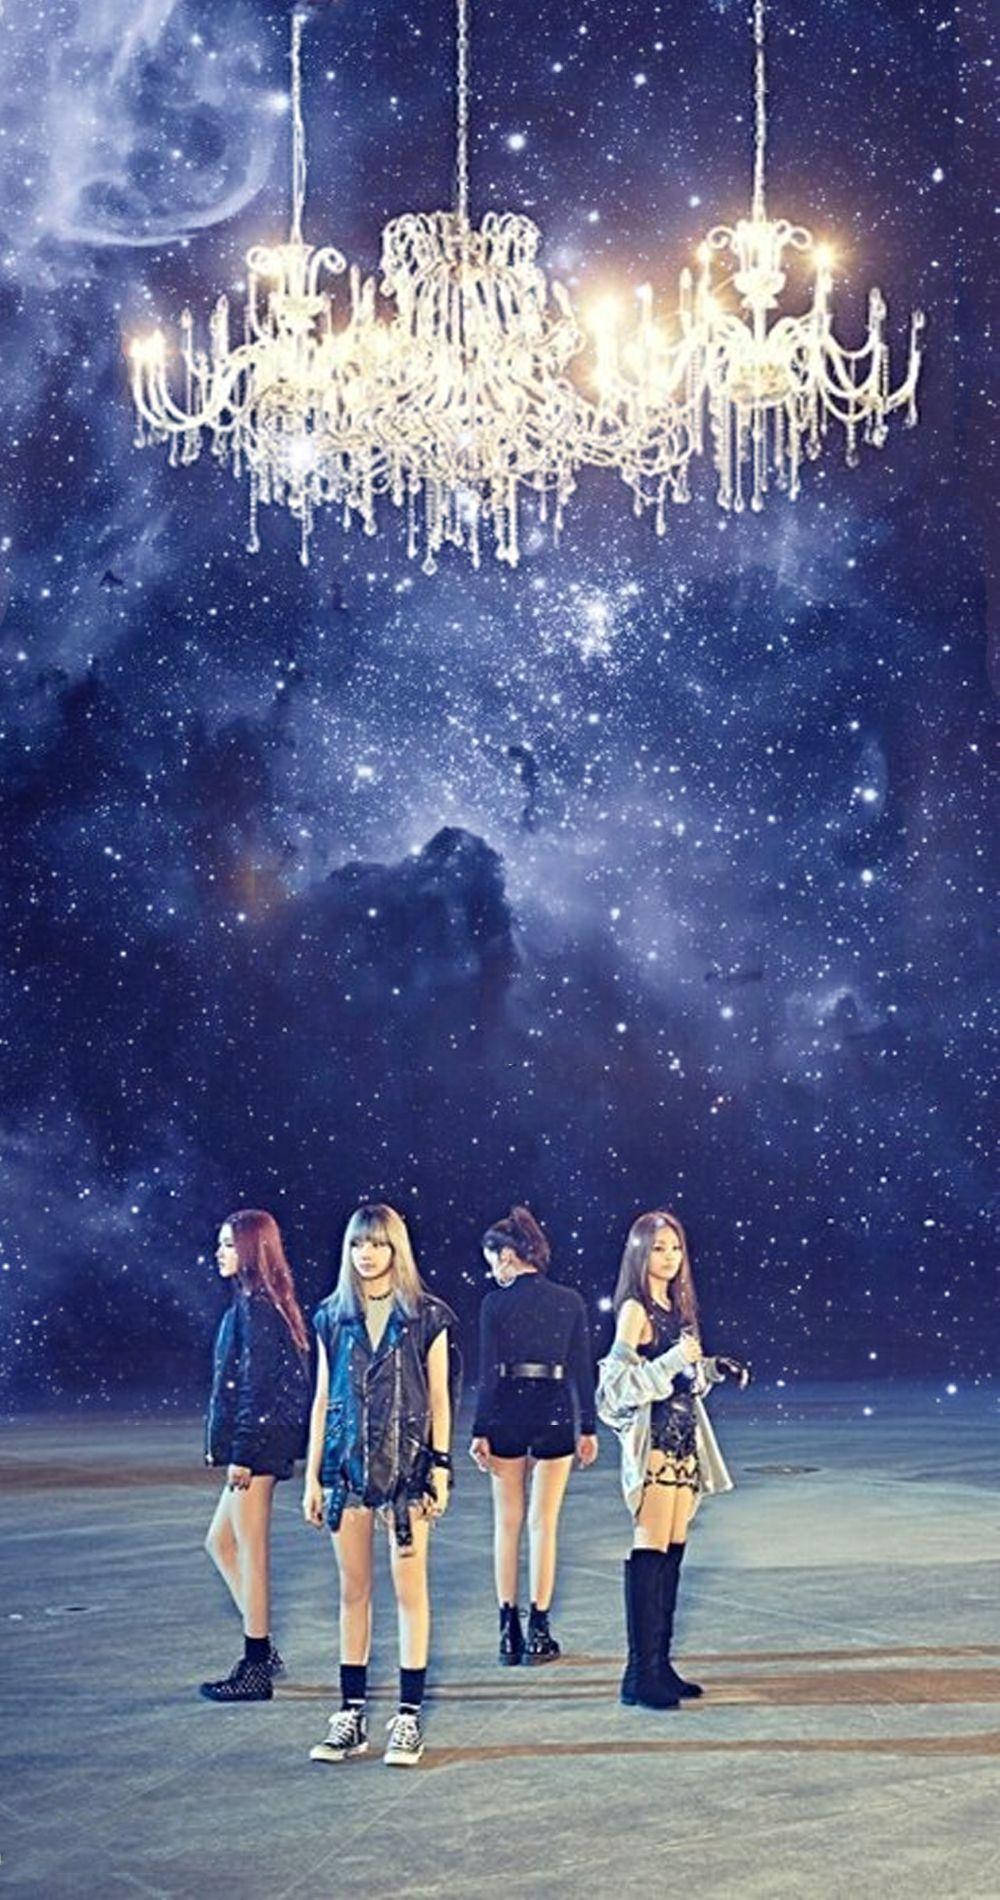 Blackpink's Whistle and Chandelier Shine in the Galaxy Wallpaper